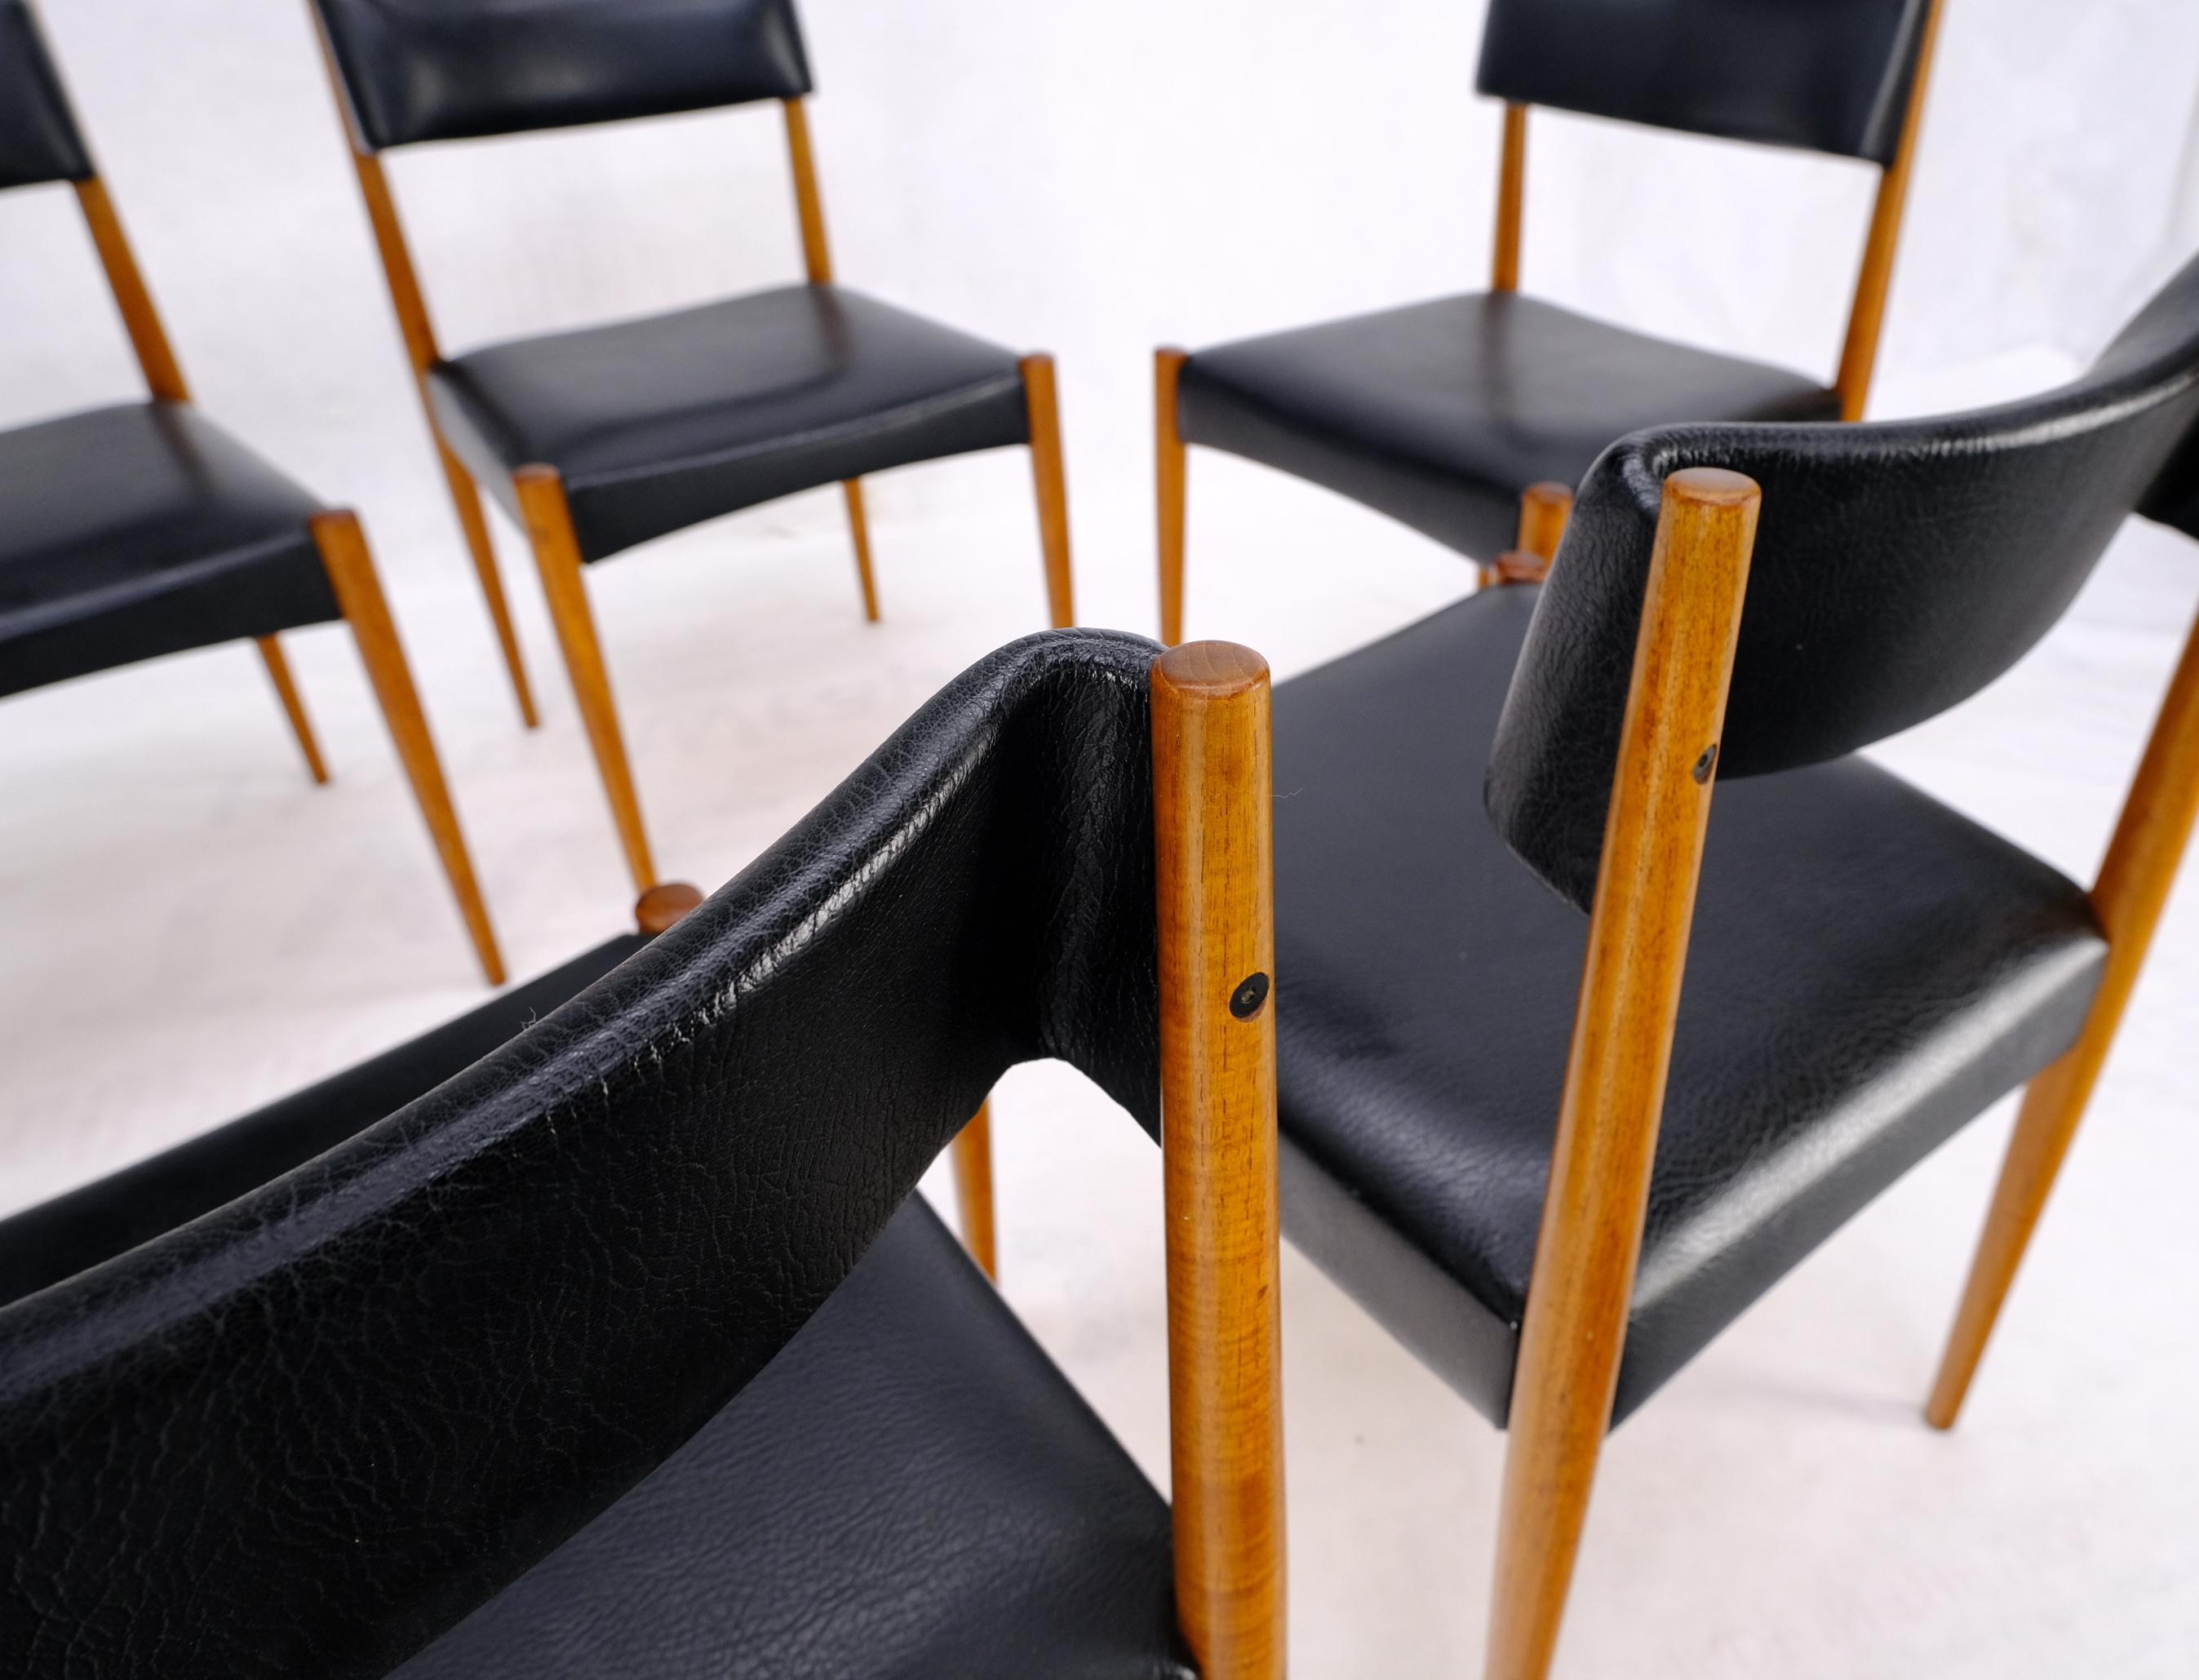 Set of six mid century modern danish teak dining chairs in black leather upholstery. Beautiful molded wrap around backs.